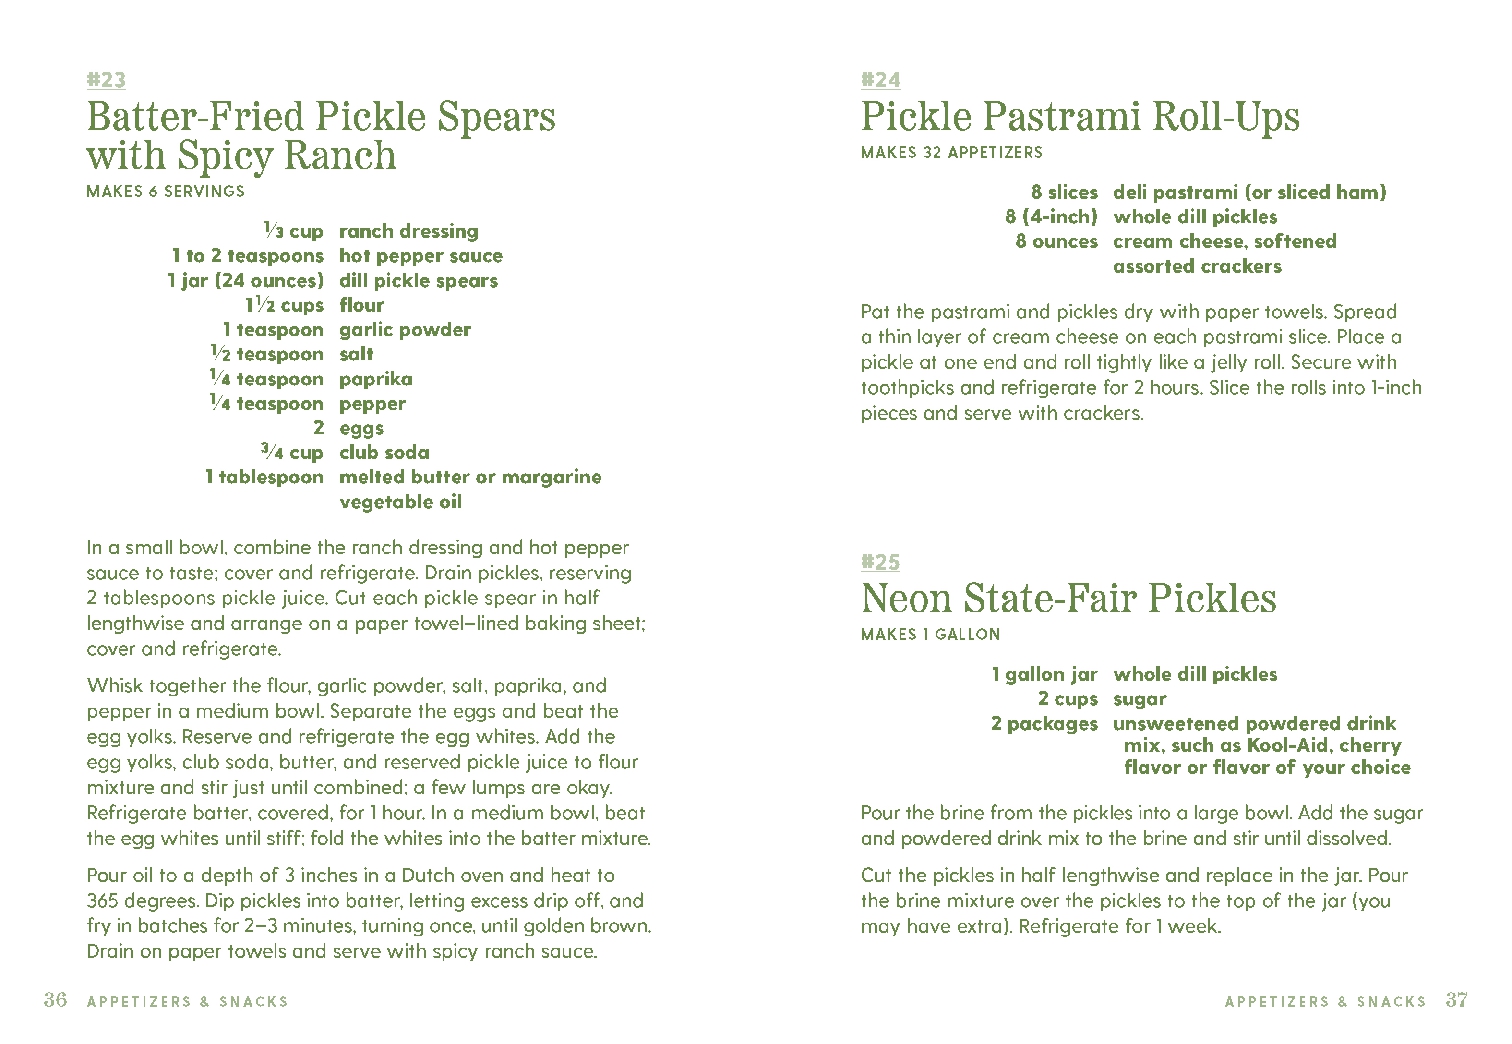 101 Things to Do With a Pickle